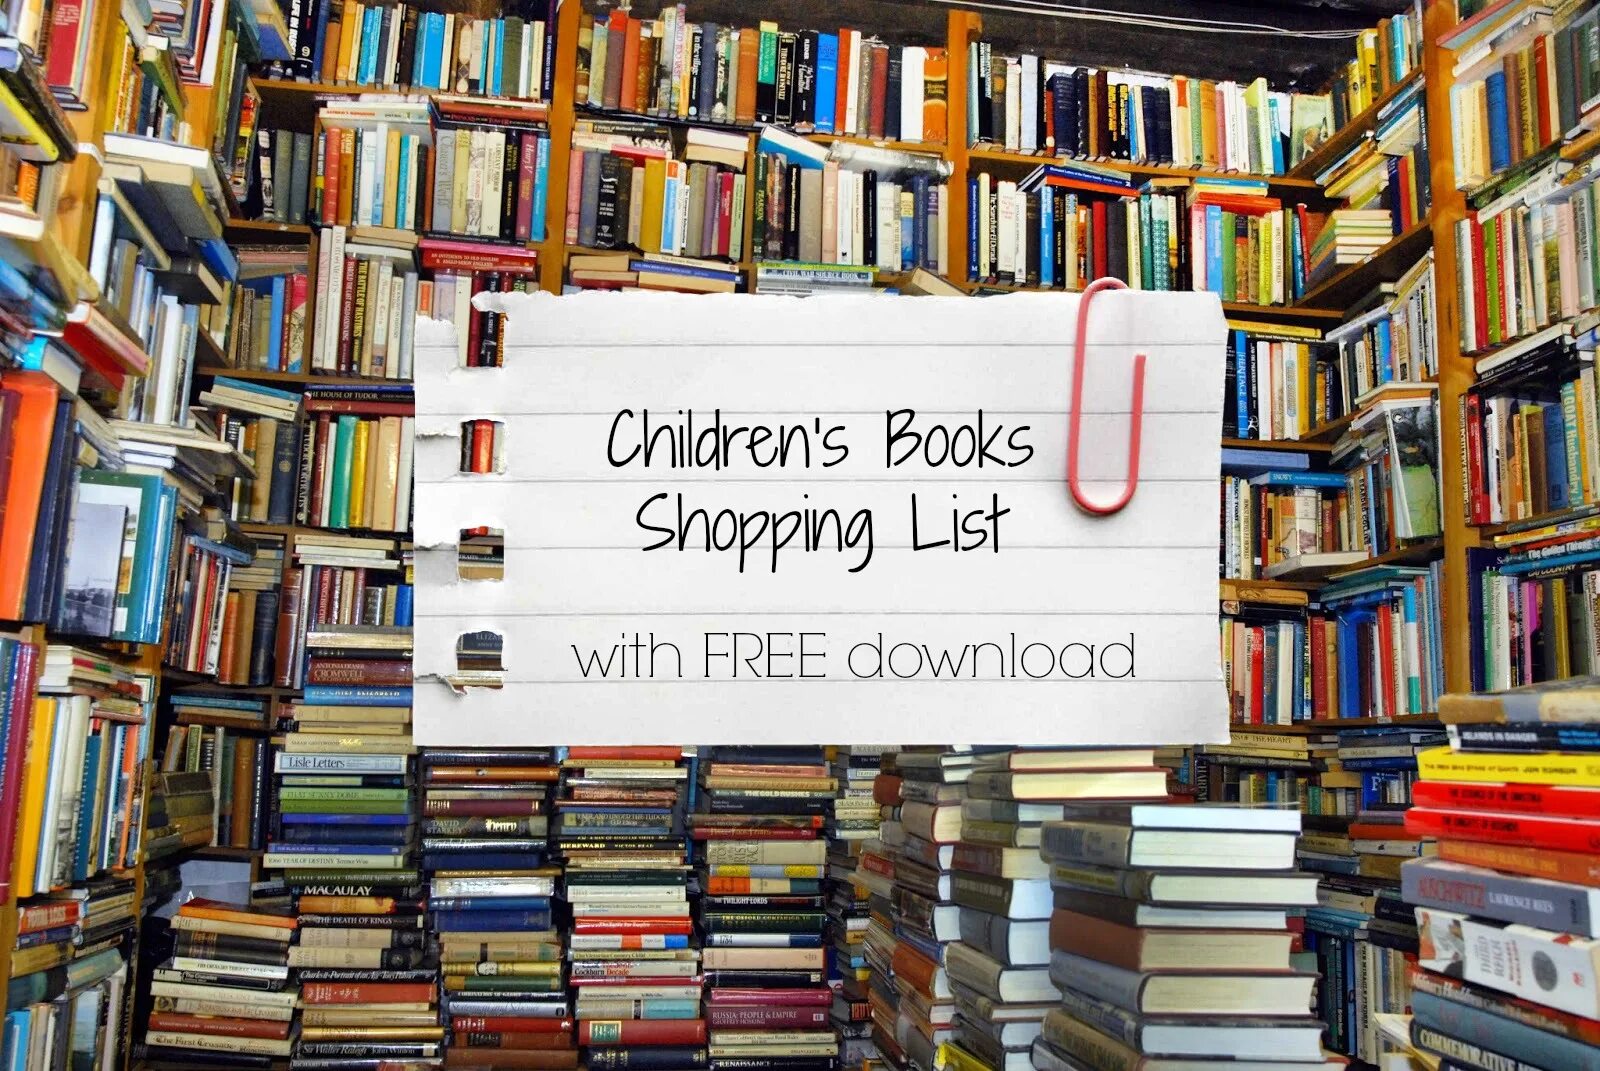 The sales book. Books for children. Books for sale. Book list. The books in this shop are